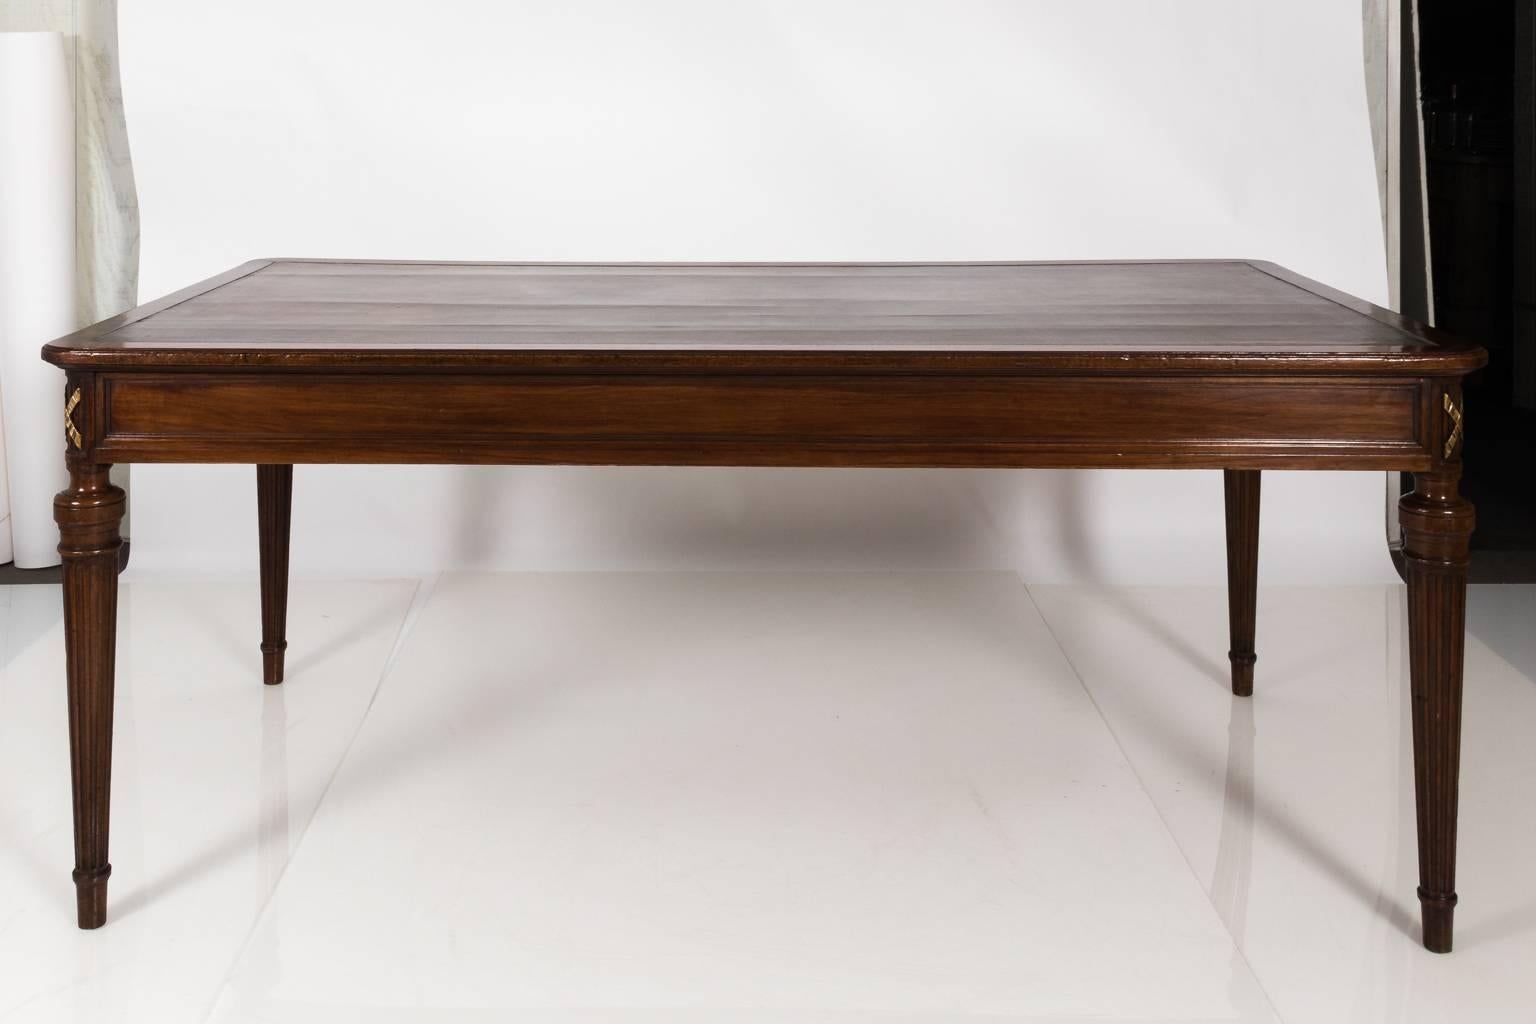 20th Century English Leather Top Library Table, circa 1940s